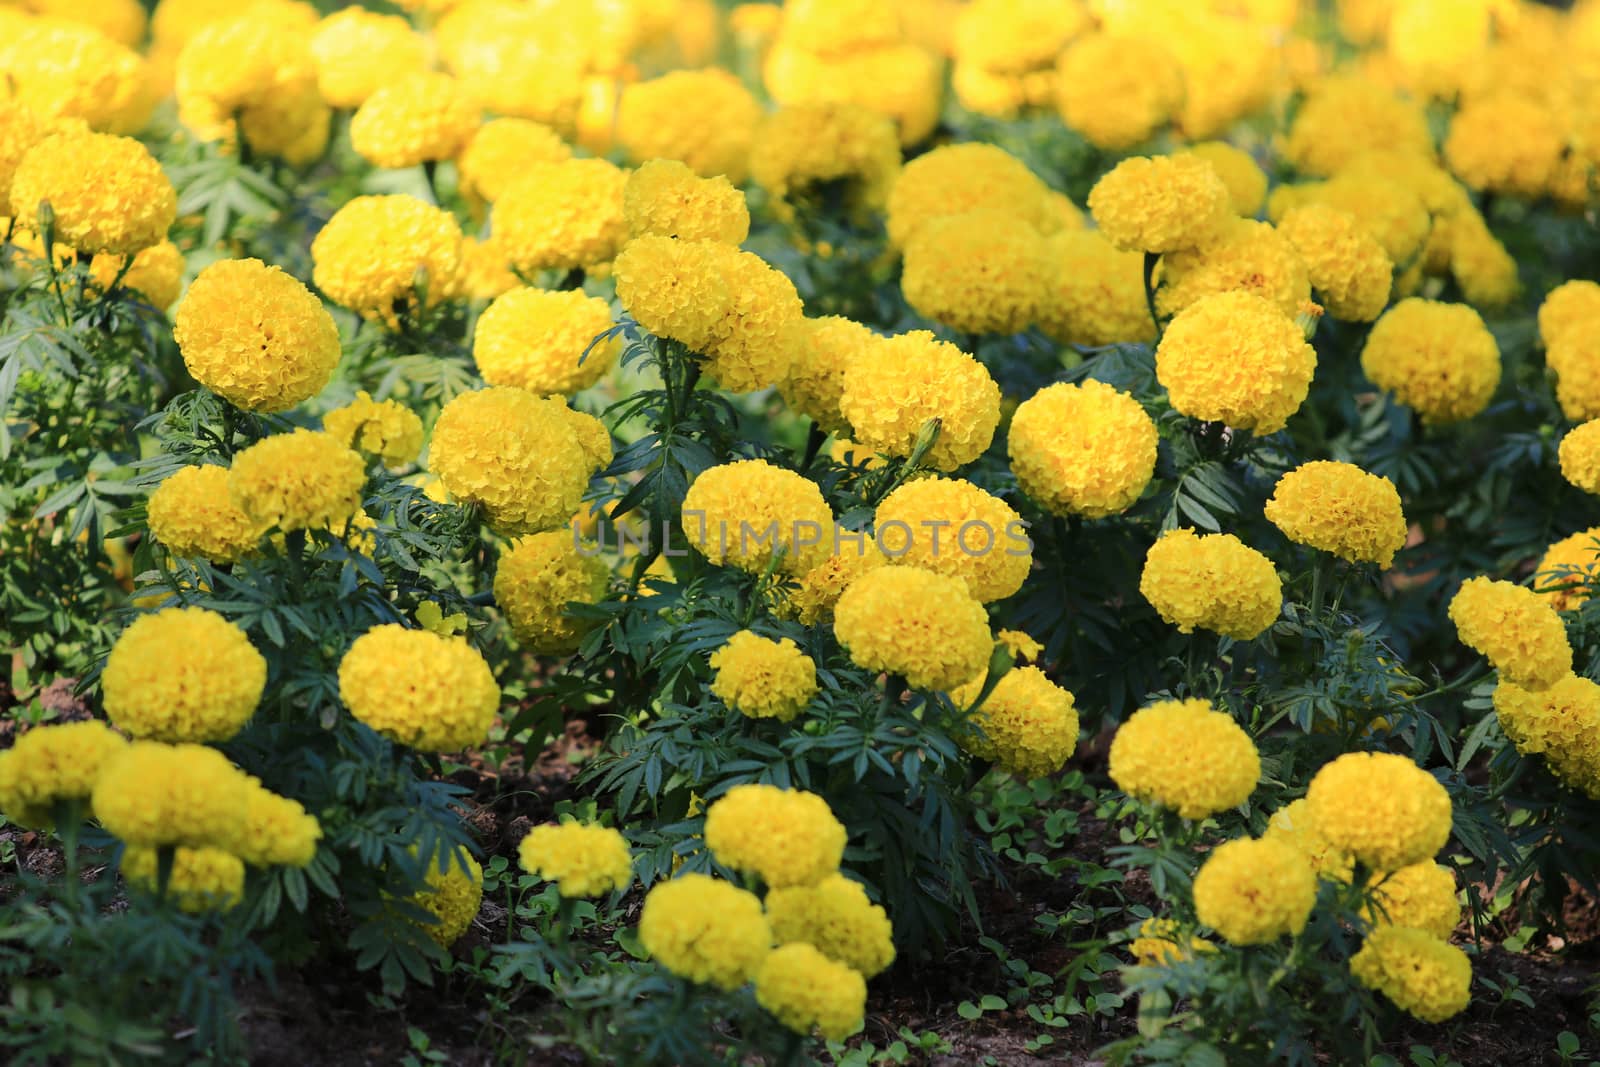 Group of Marigold or Tagetes erecta flower Blooming in garden,pattern of yellow Marigold flower as a Floral background